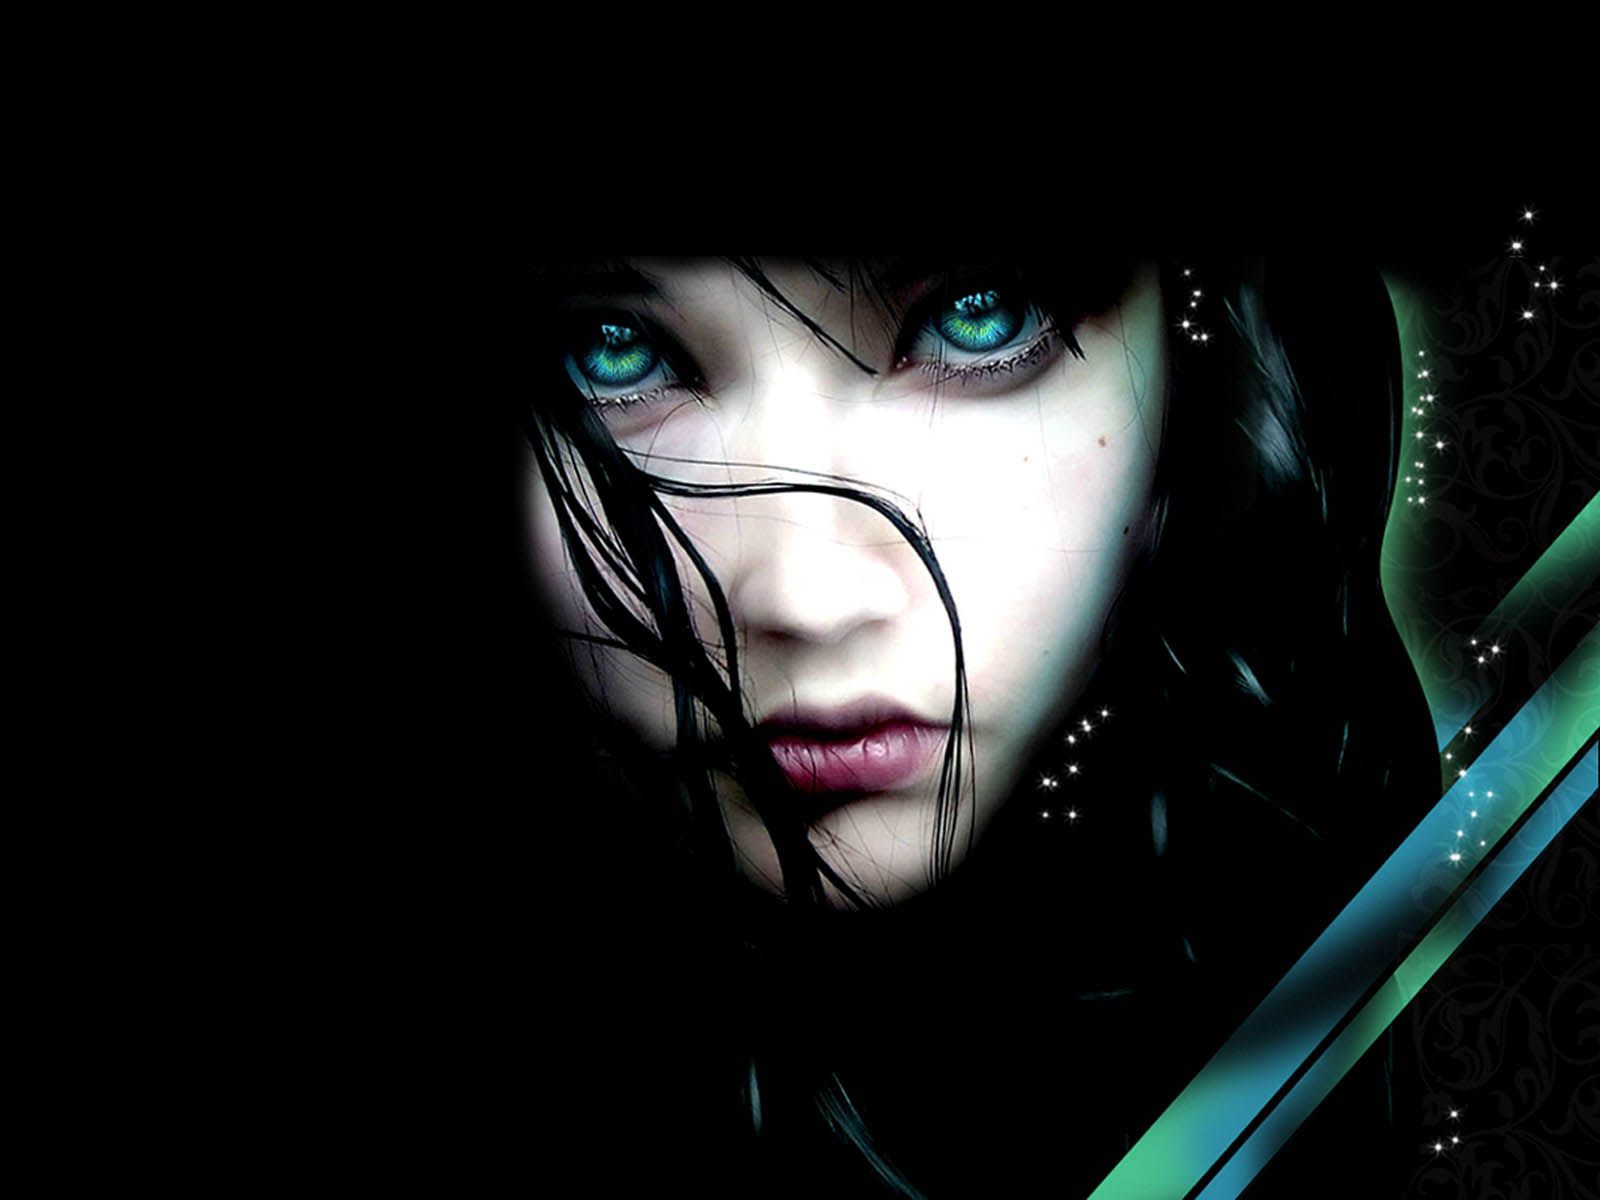 Emo GIrl Latest HD Wallpapers Free Download | New HD Wallpapers ...